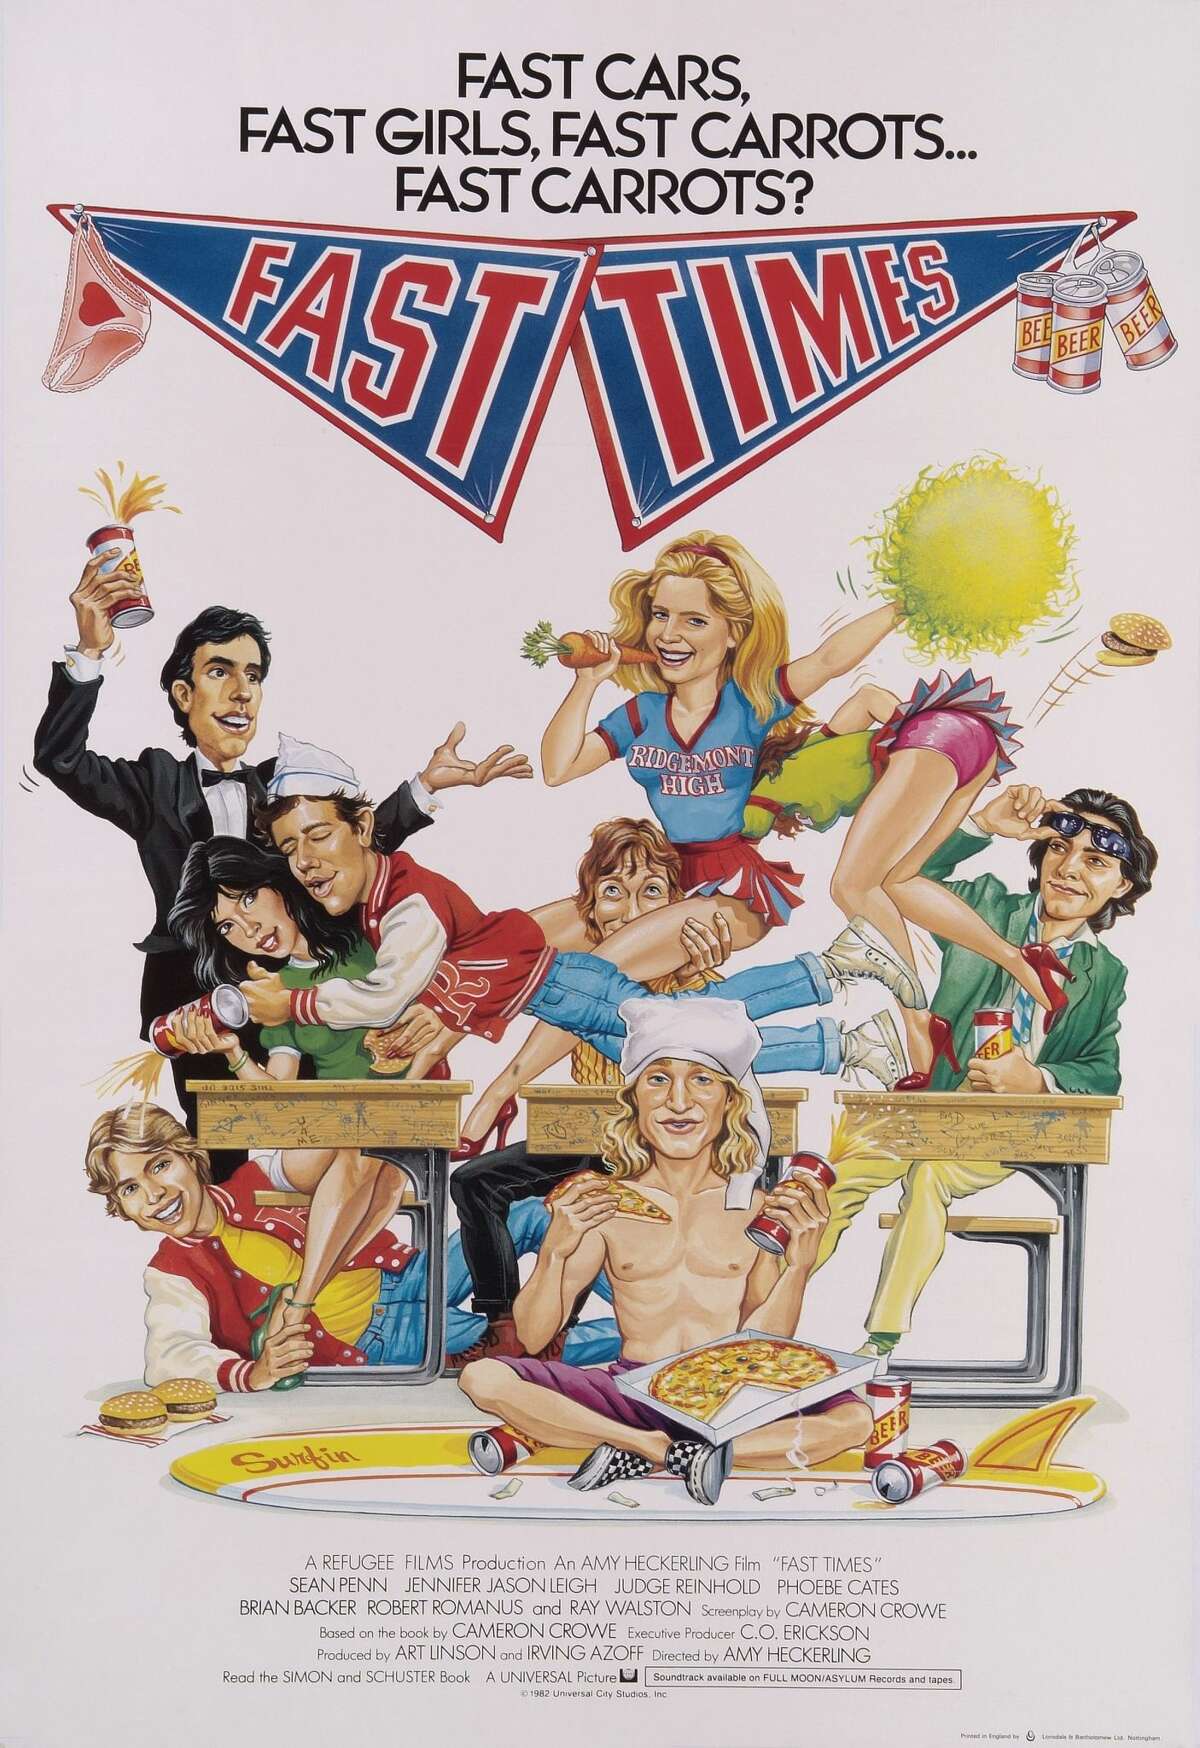 An original poster for Amy Heckerling's 1982 comedy 'Fast Times at Ridgemont High' starring Sean Penn, Phoebe Cates, and Judge Reinhold. 